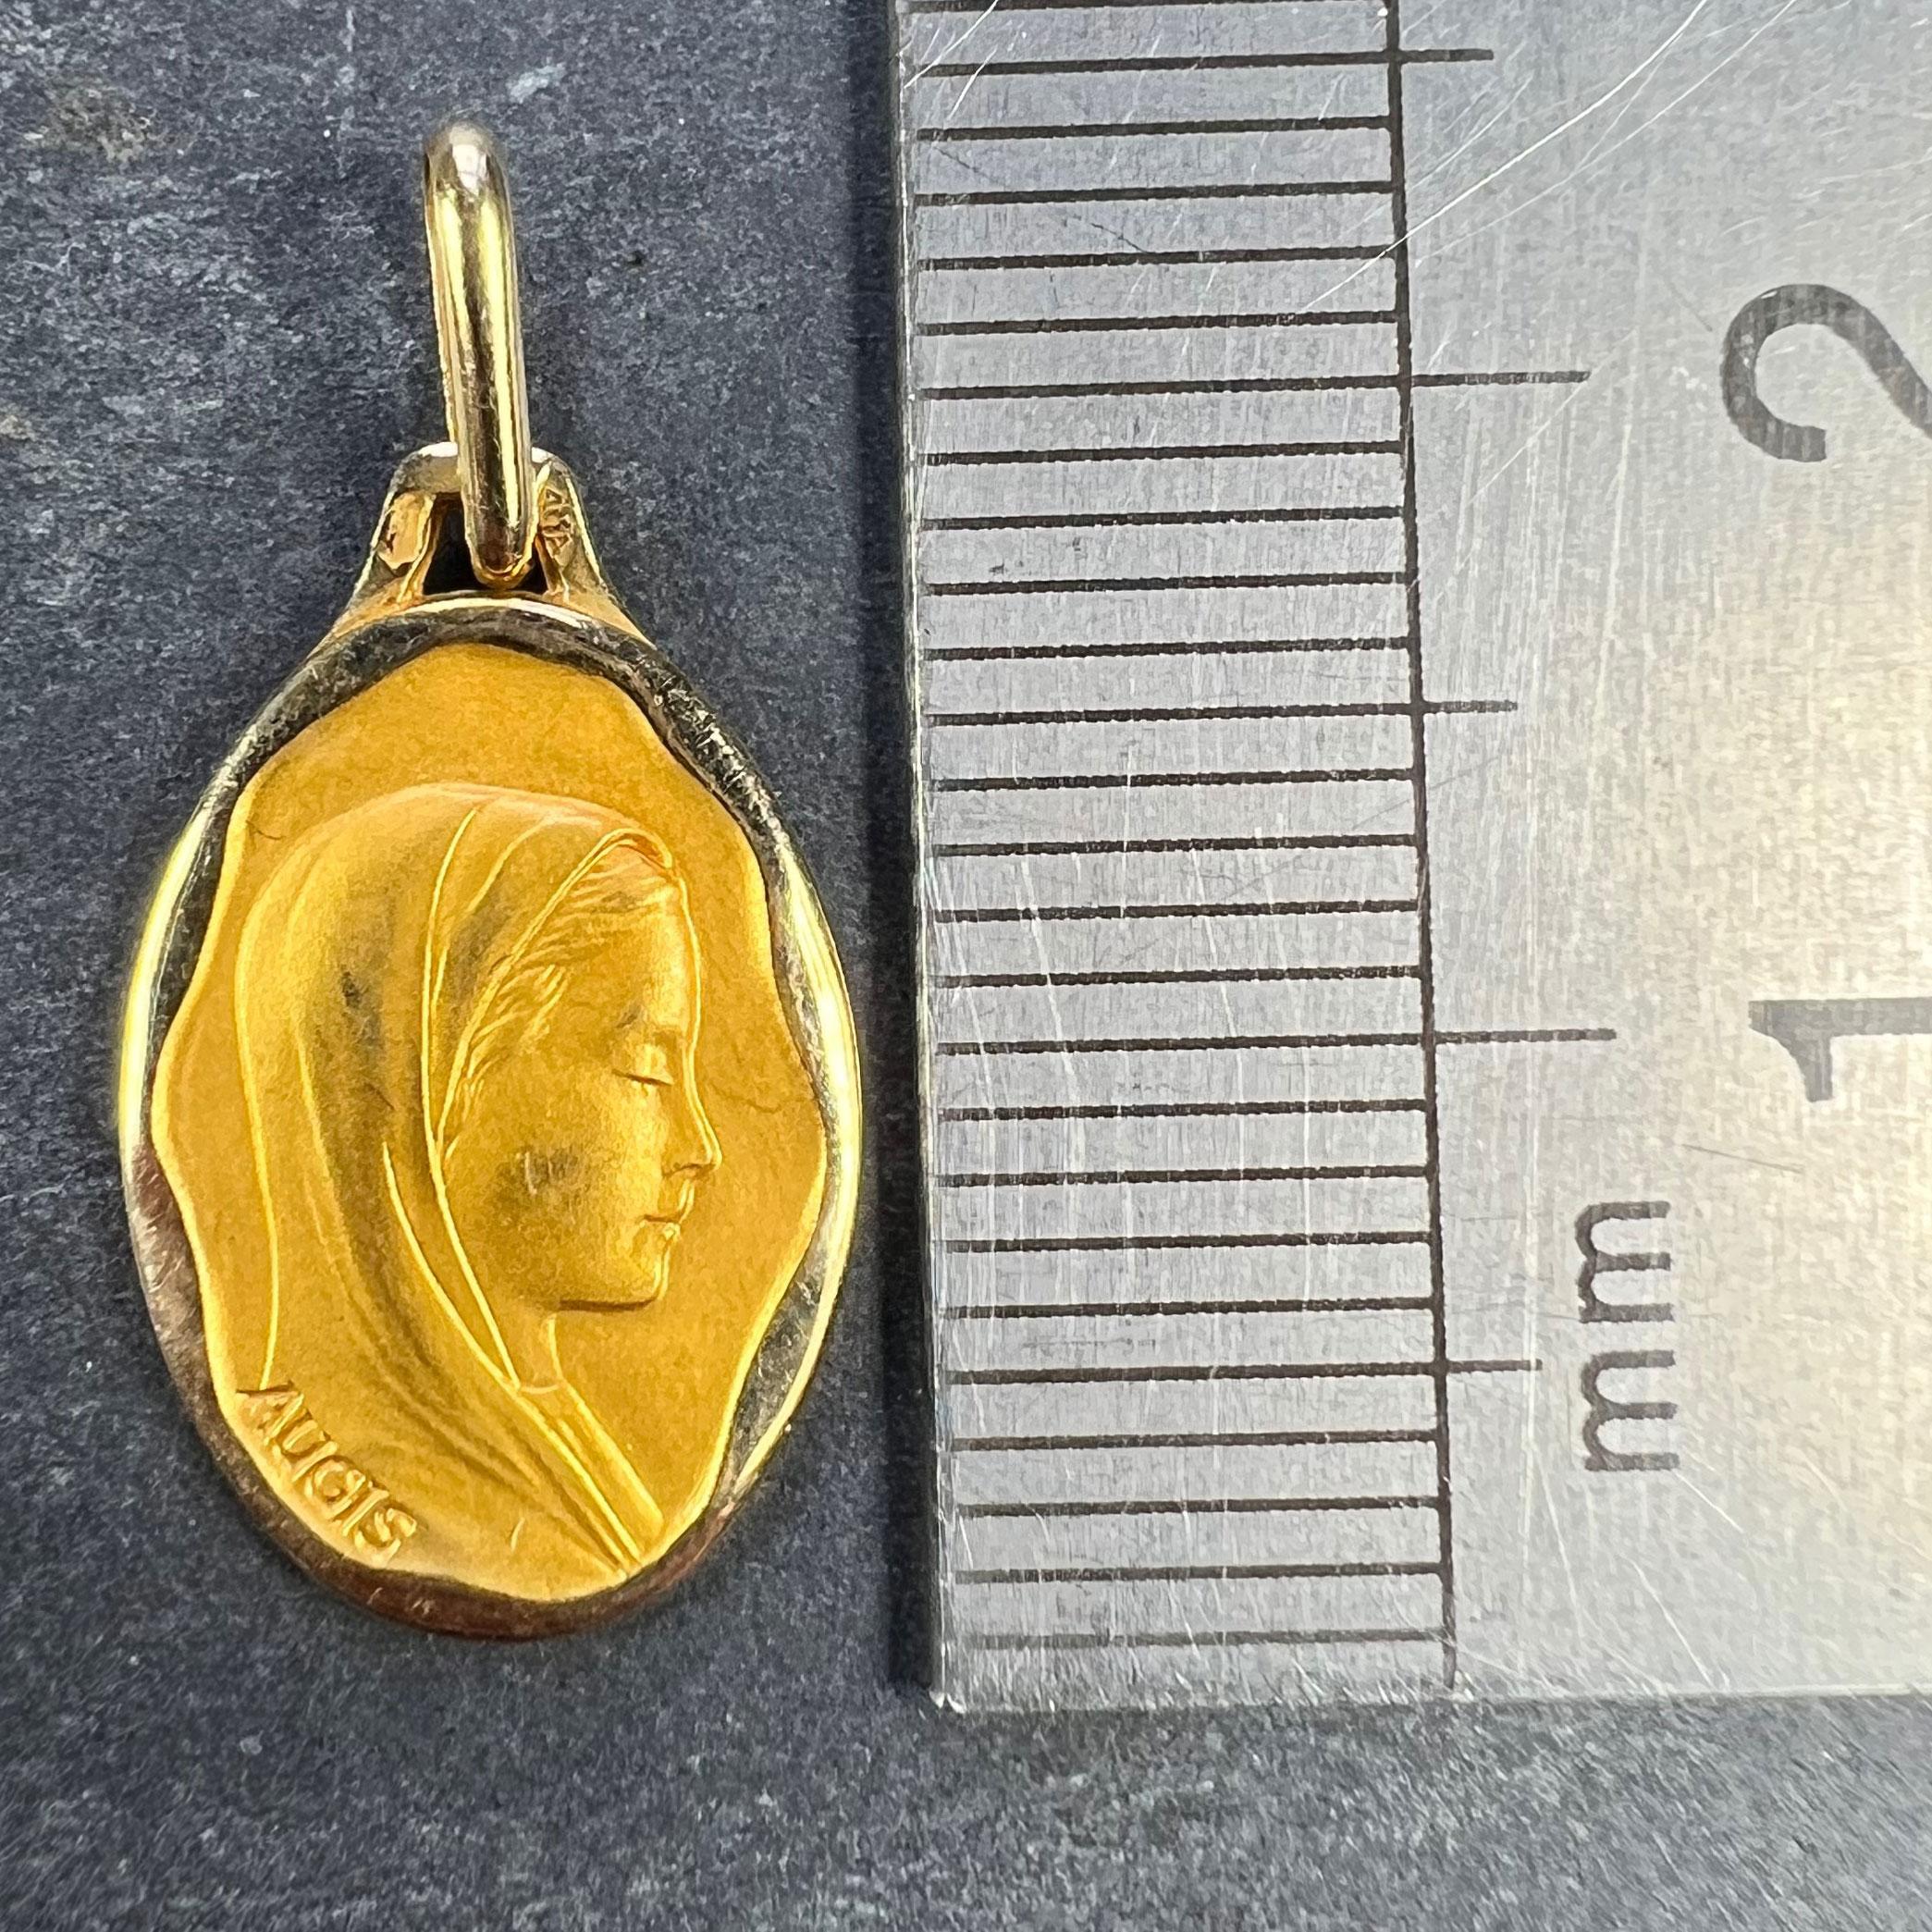 French Augis Virgin Mary 18K Yellow Gold Religious Medal Pendant For Sale 5